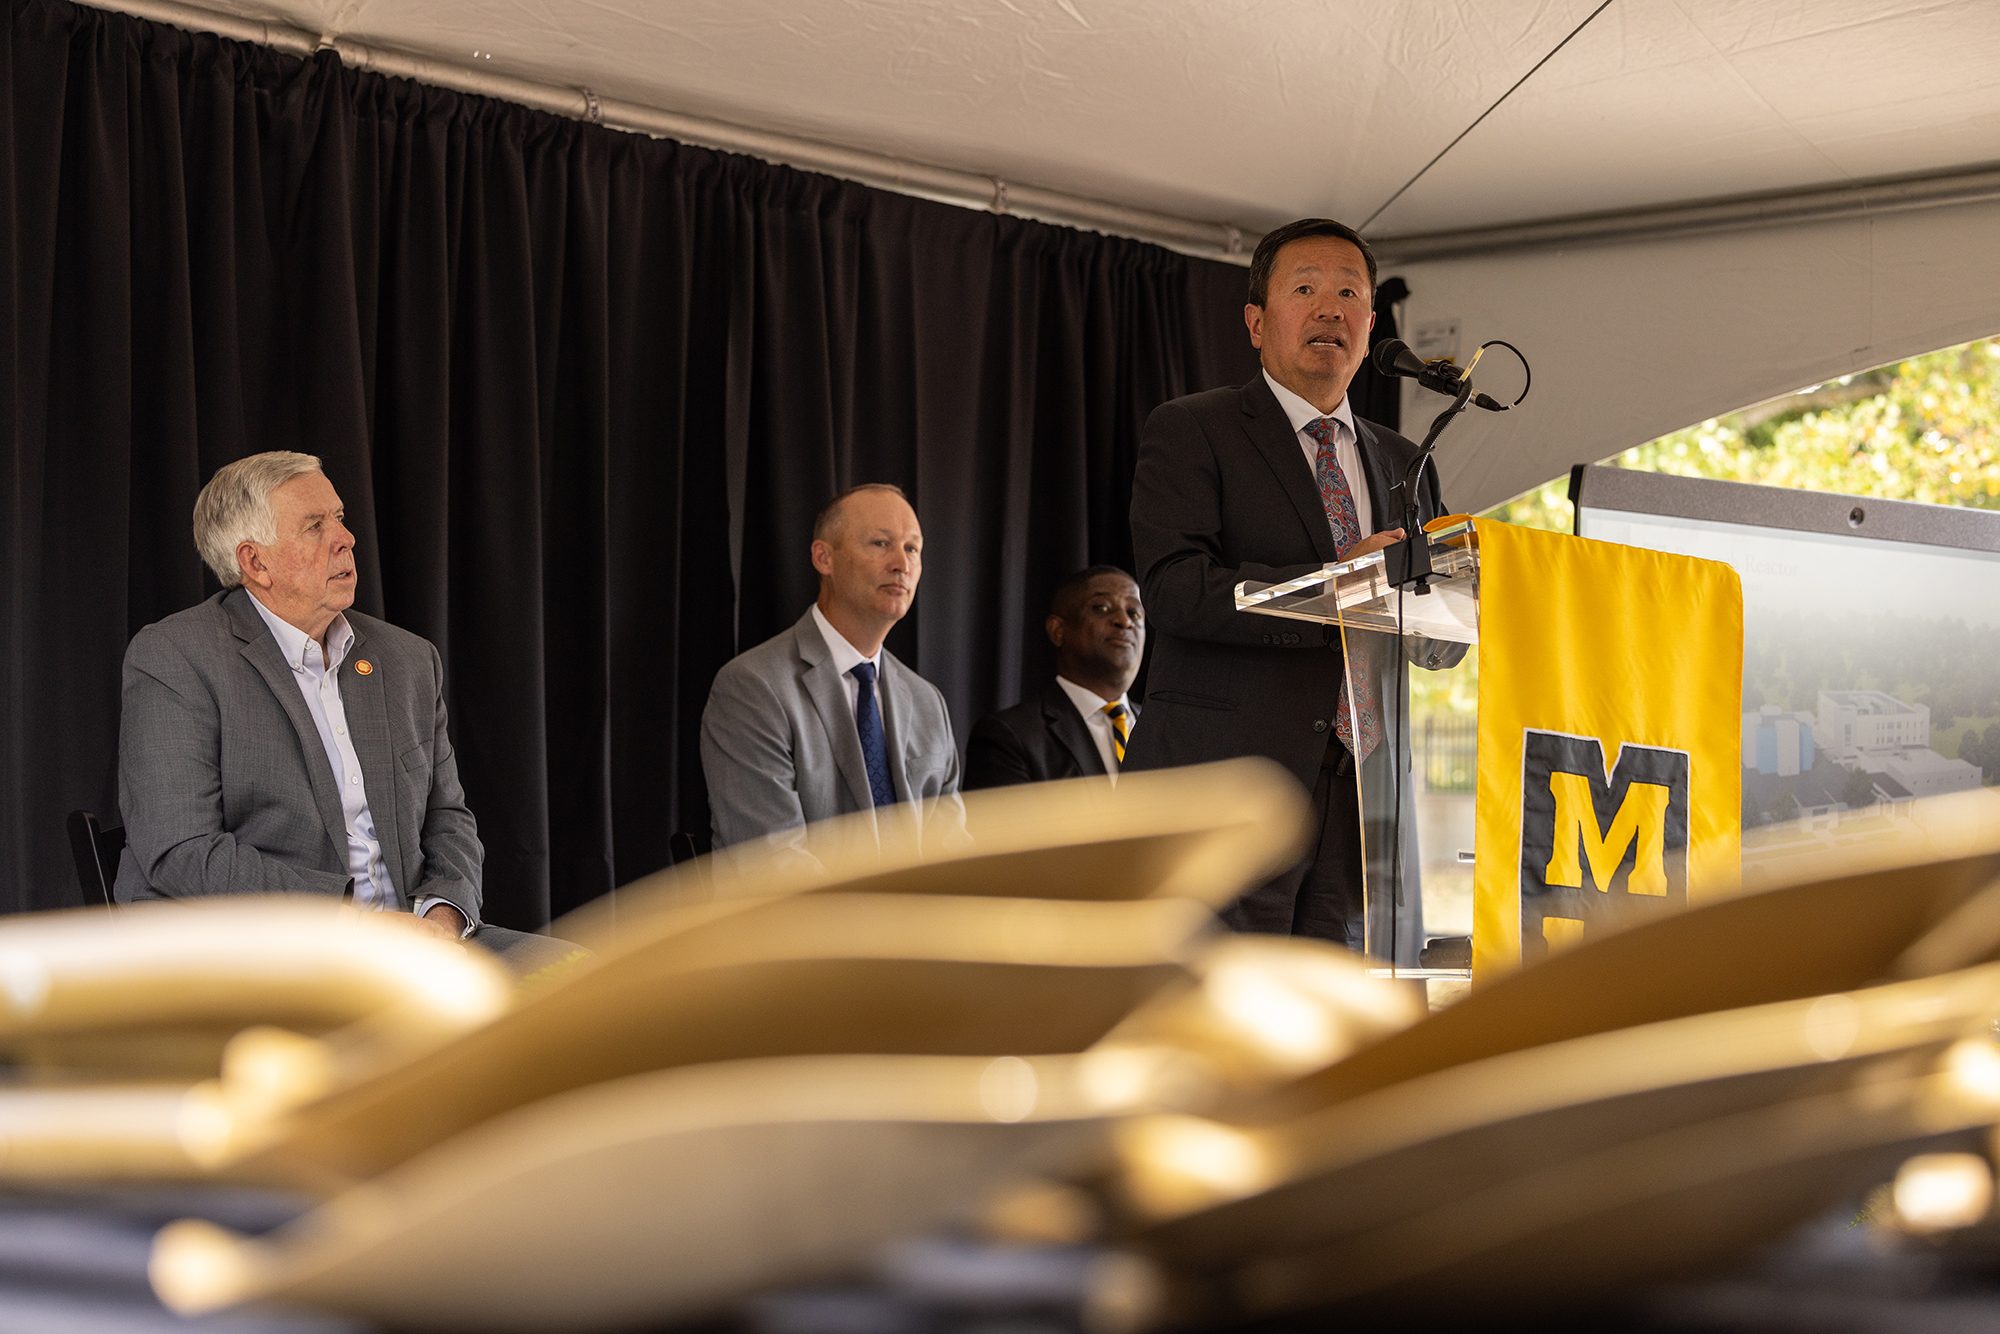 Mun Choi, president of the University of Missouri, speaks during the groundbreaking ceremony for MURR West.